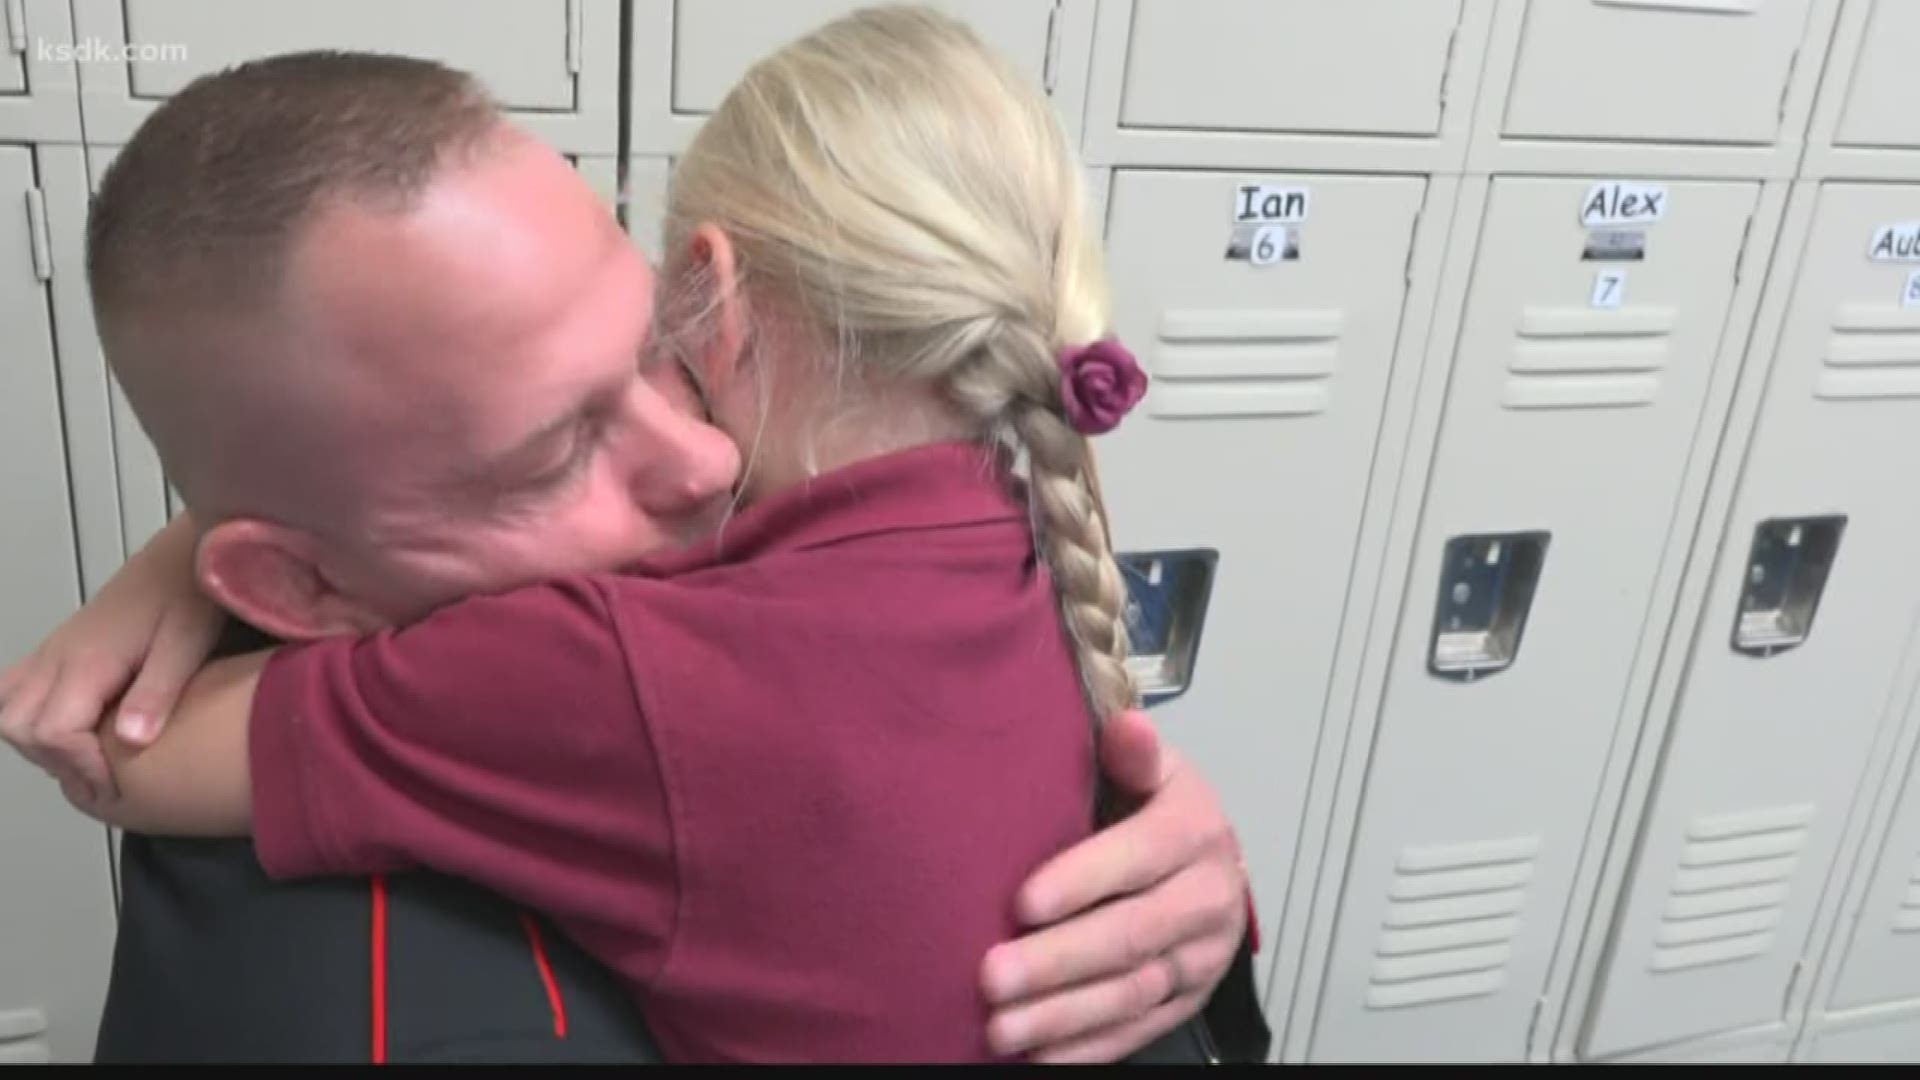 After nearly a year in the middle east, a St. Charles service member is finally getting the chance to hug his daughter again.